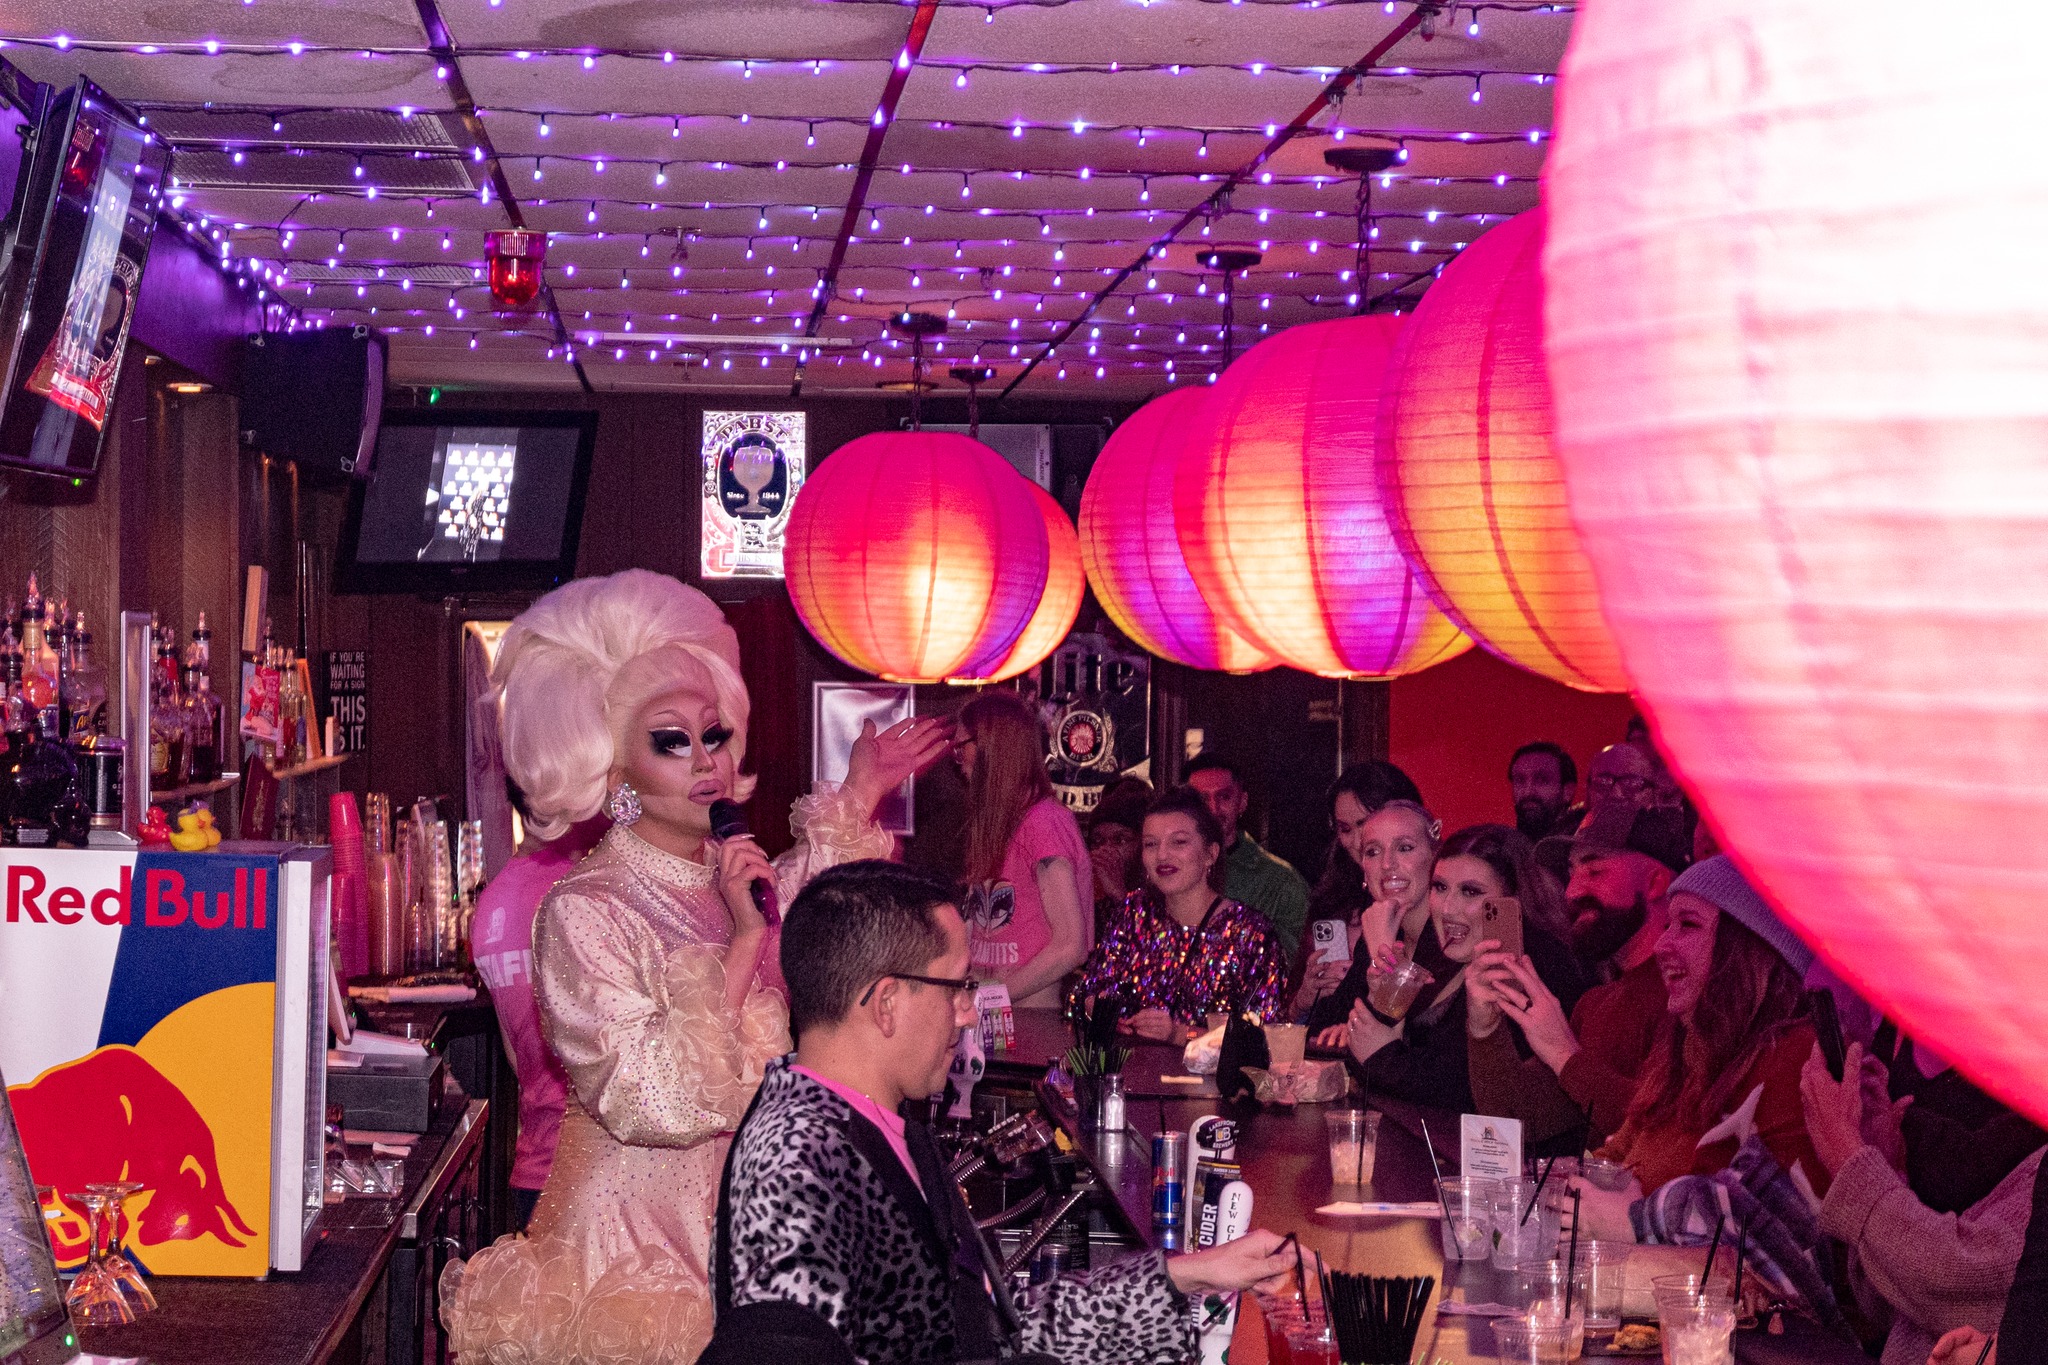 Trixie Mattel, a drag performer with giant blonde wig, holds the microphone among a seated crowd in a bar with pink and red lanterns.